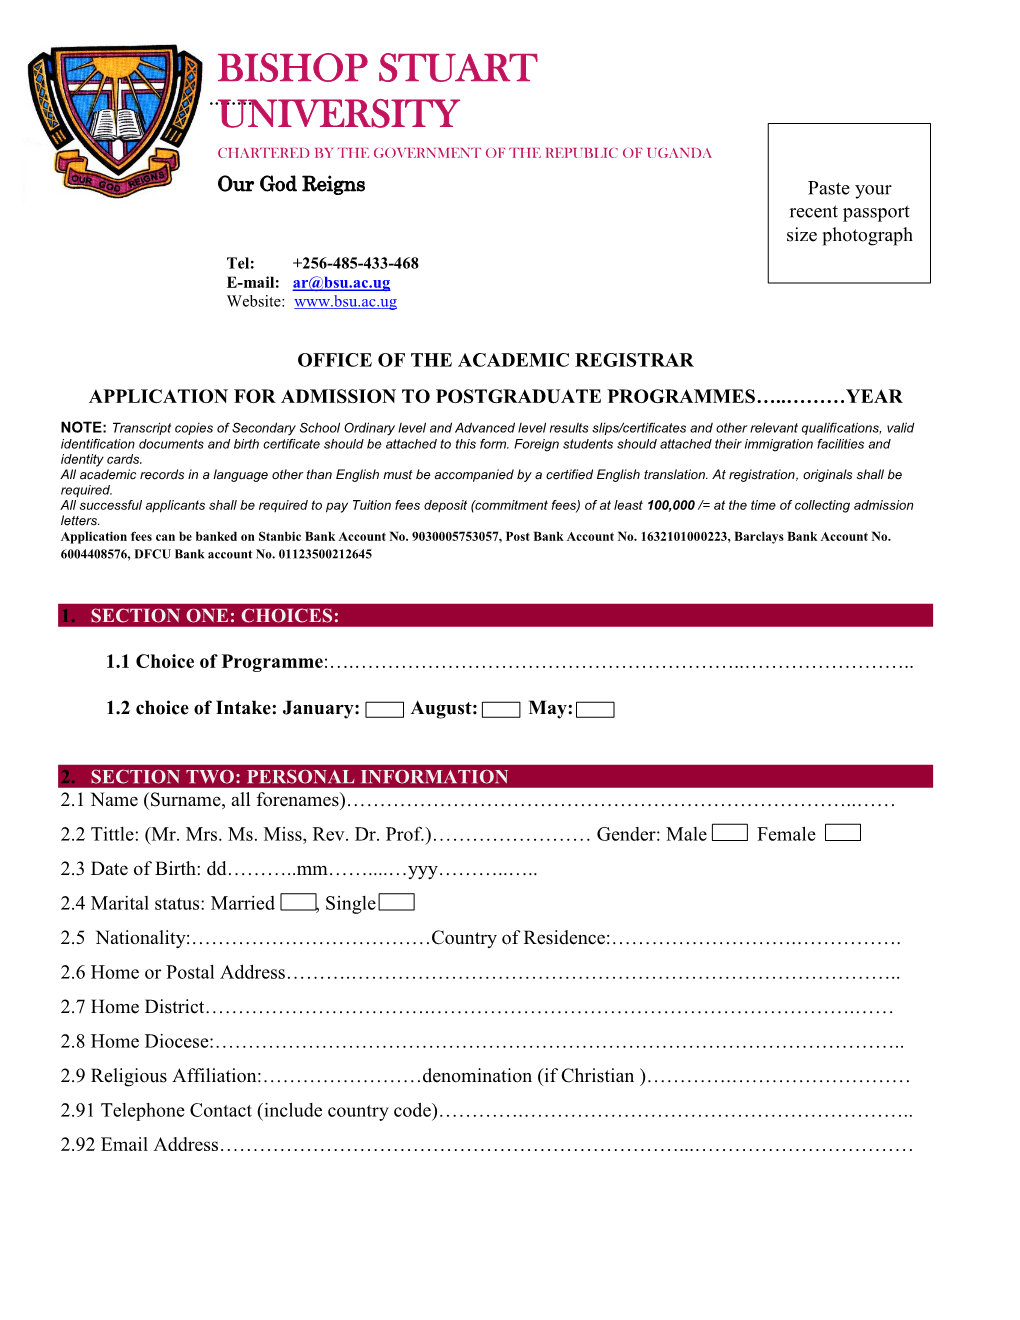 Application for Admission to the MA and Ph